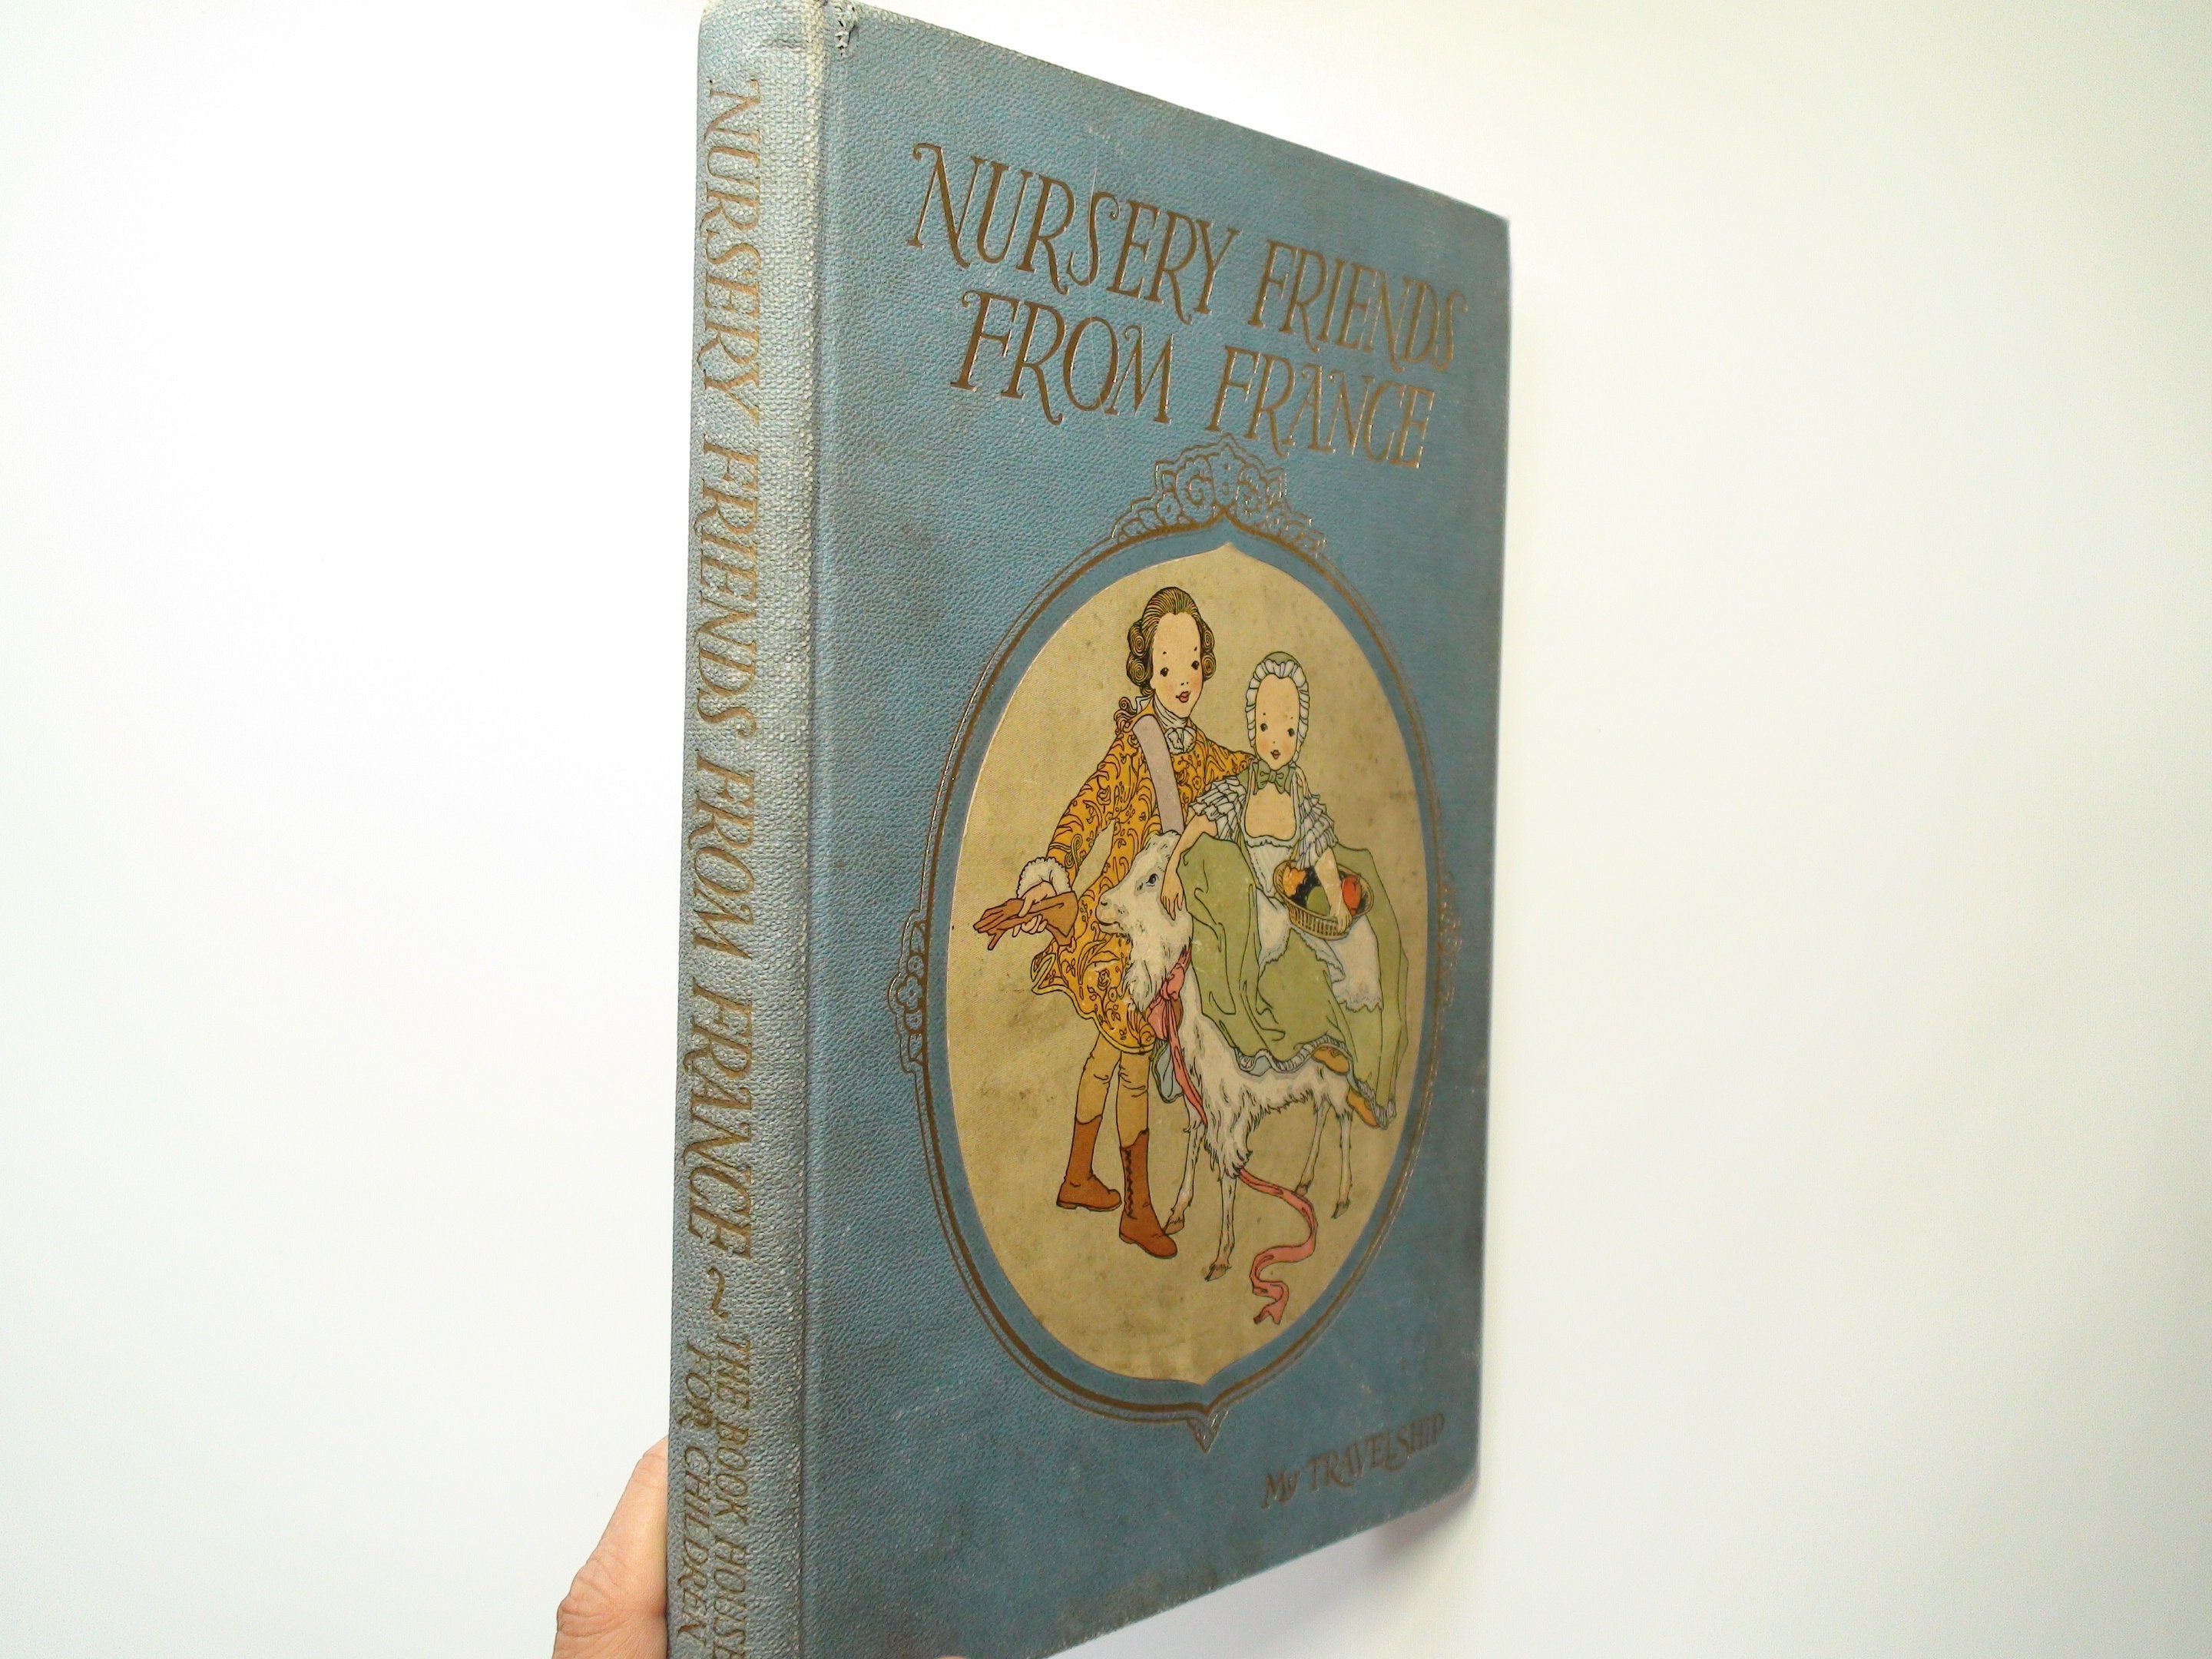 Nursery Friends from France, Olive Beaupre Miller, Illustrated, 1st Ed, 1927